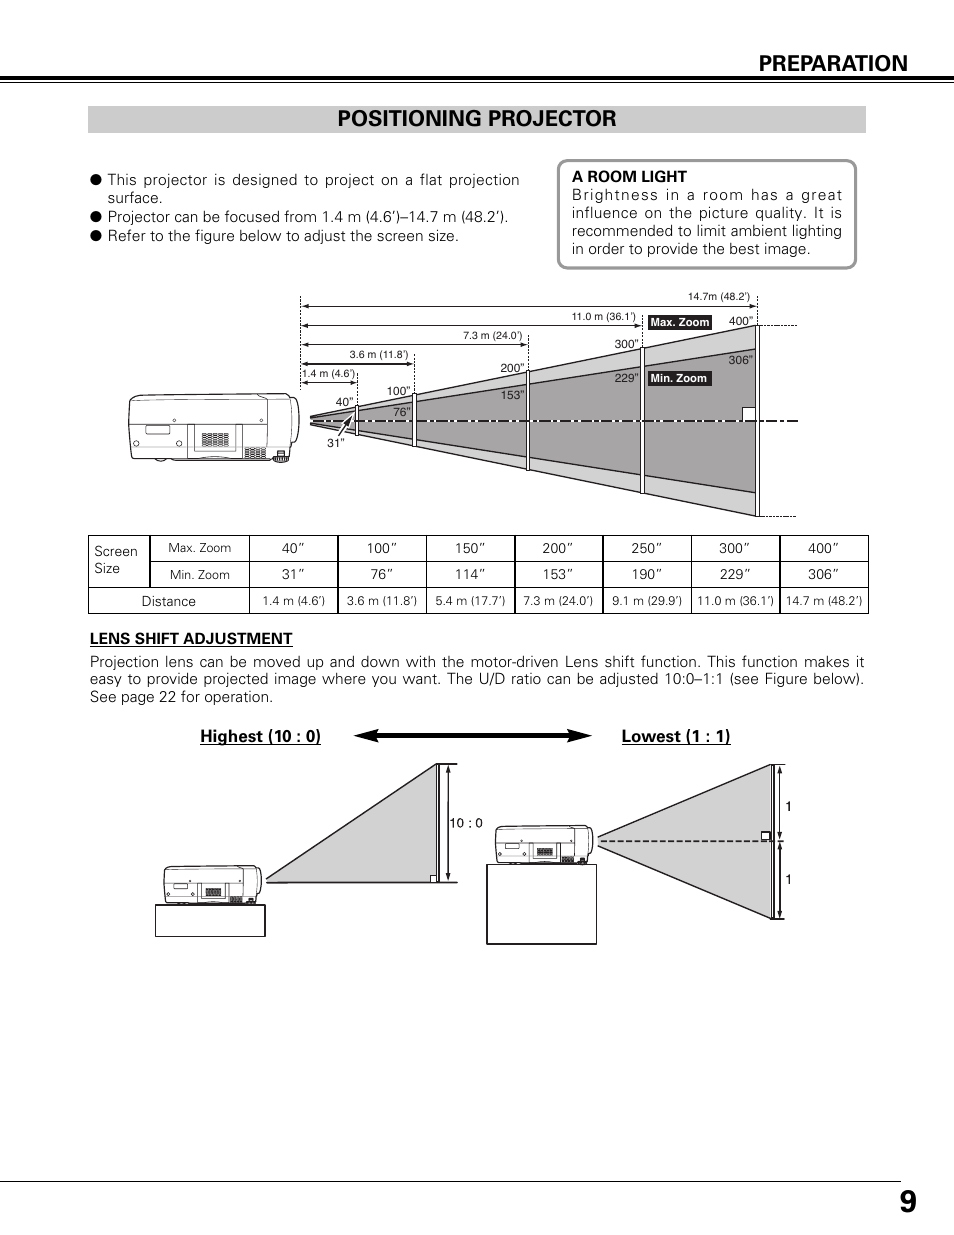 Positioning projector, Preparation positioning projector | Canon LV-7575 User Manual | Page 9 / 63